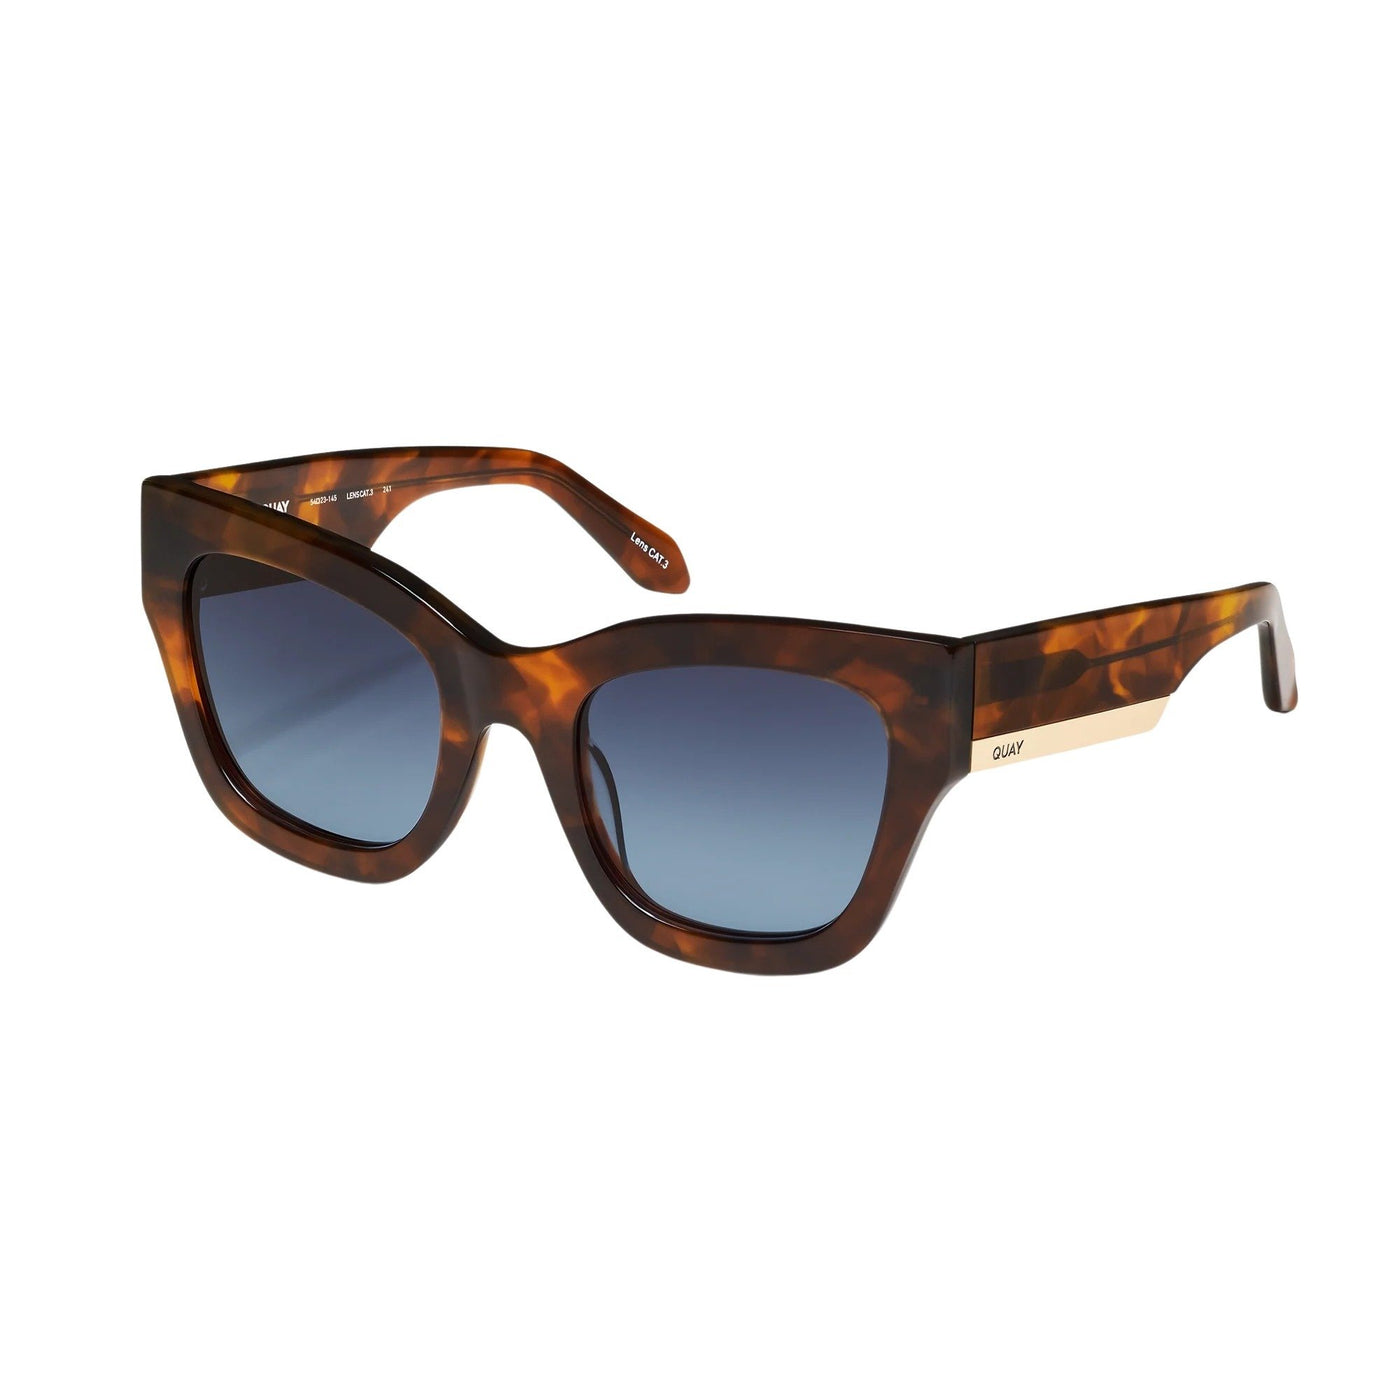 Quay Women's By The Way Oversized Square Sunglasses (Brown Tortoise Frame/Navy to Blue Gradient Lens) - 3/4 left angle